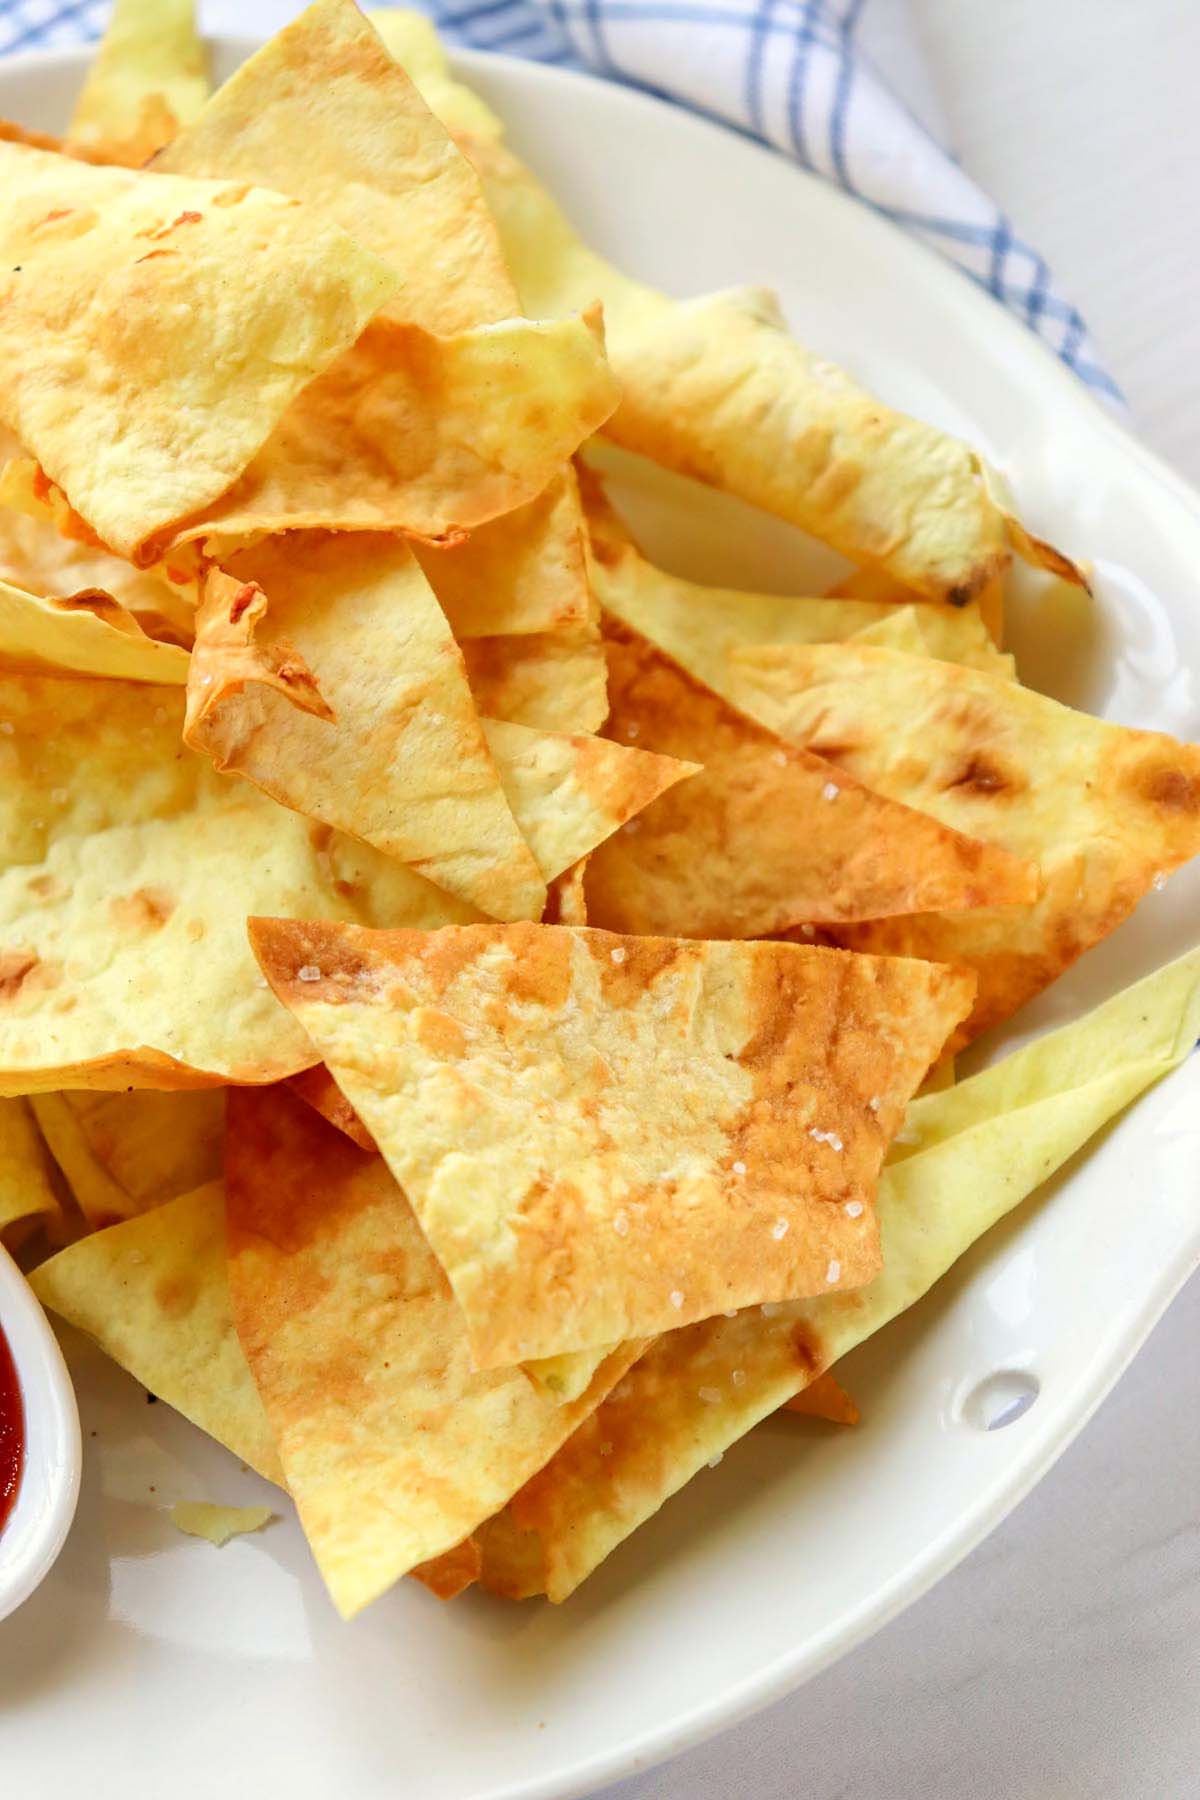 Tortilla chips on a plate.